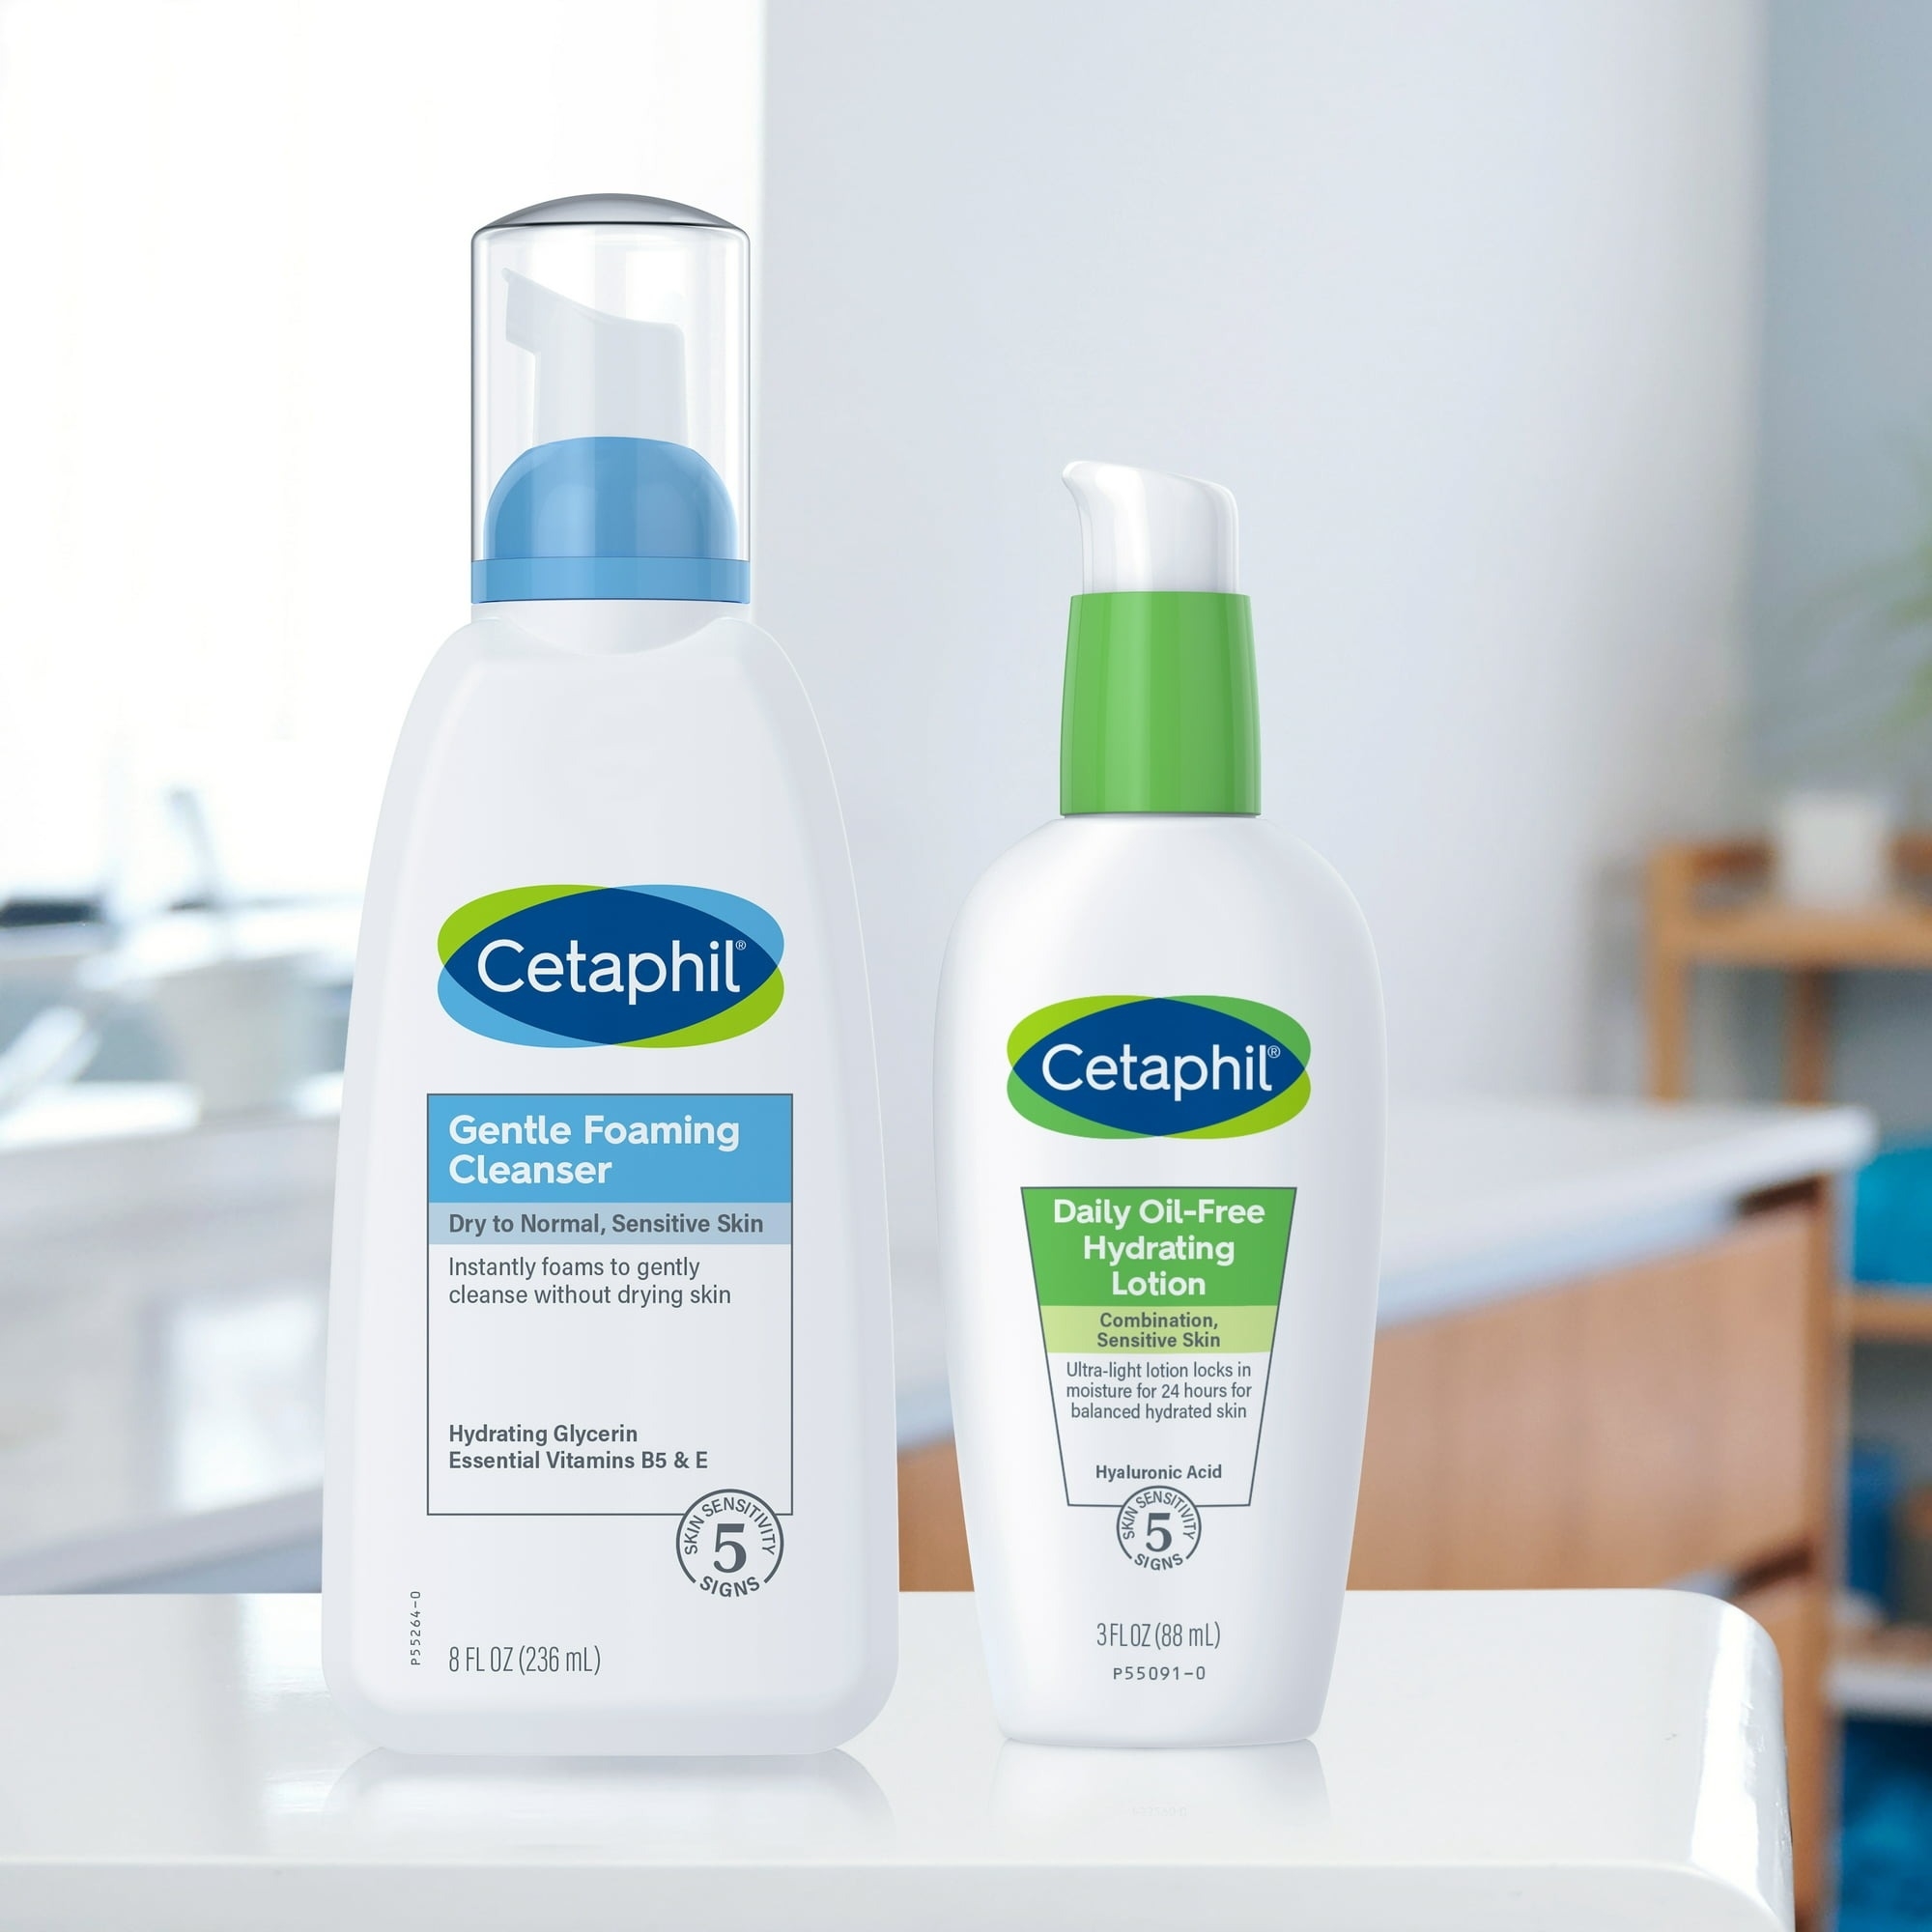 the Cetaphil gentle foaming cleaner bottle on counter